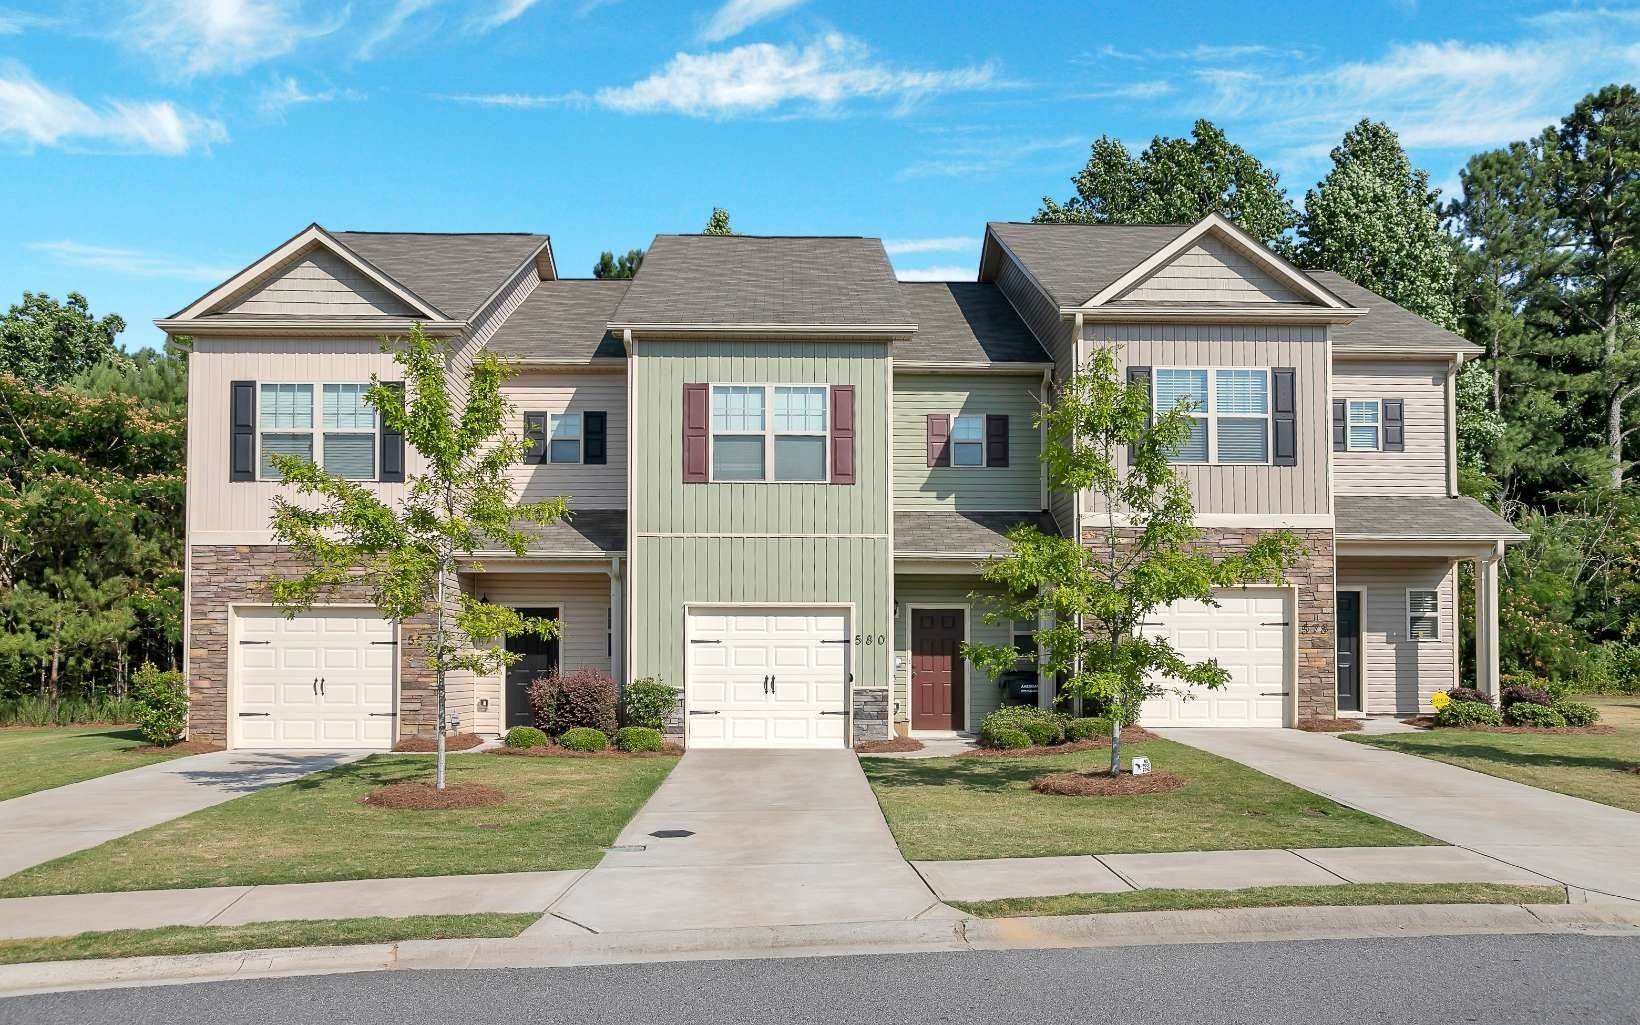 2. Townhouse for Sale at Acworth, GA 30102